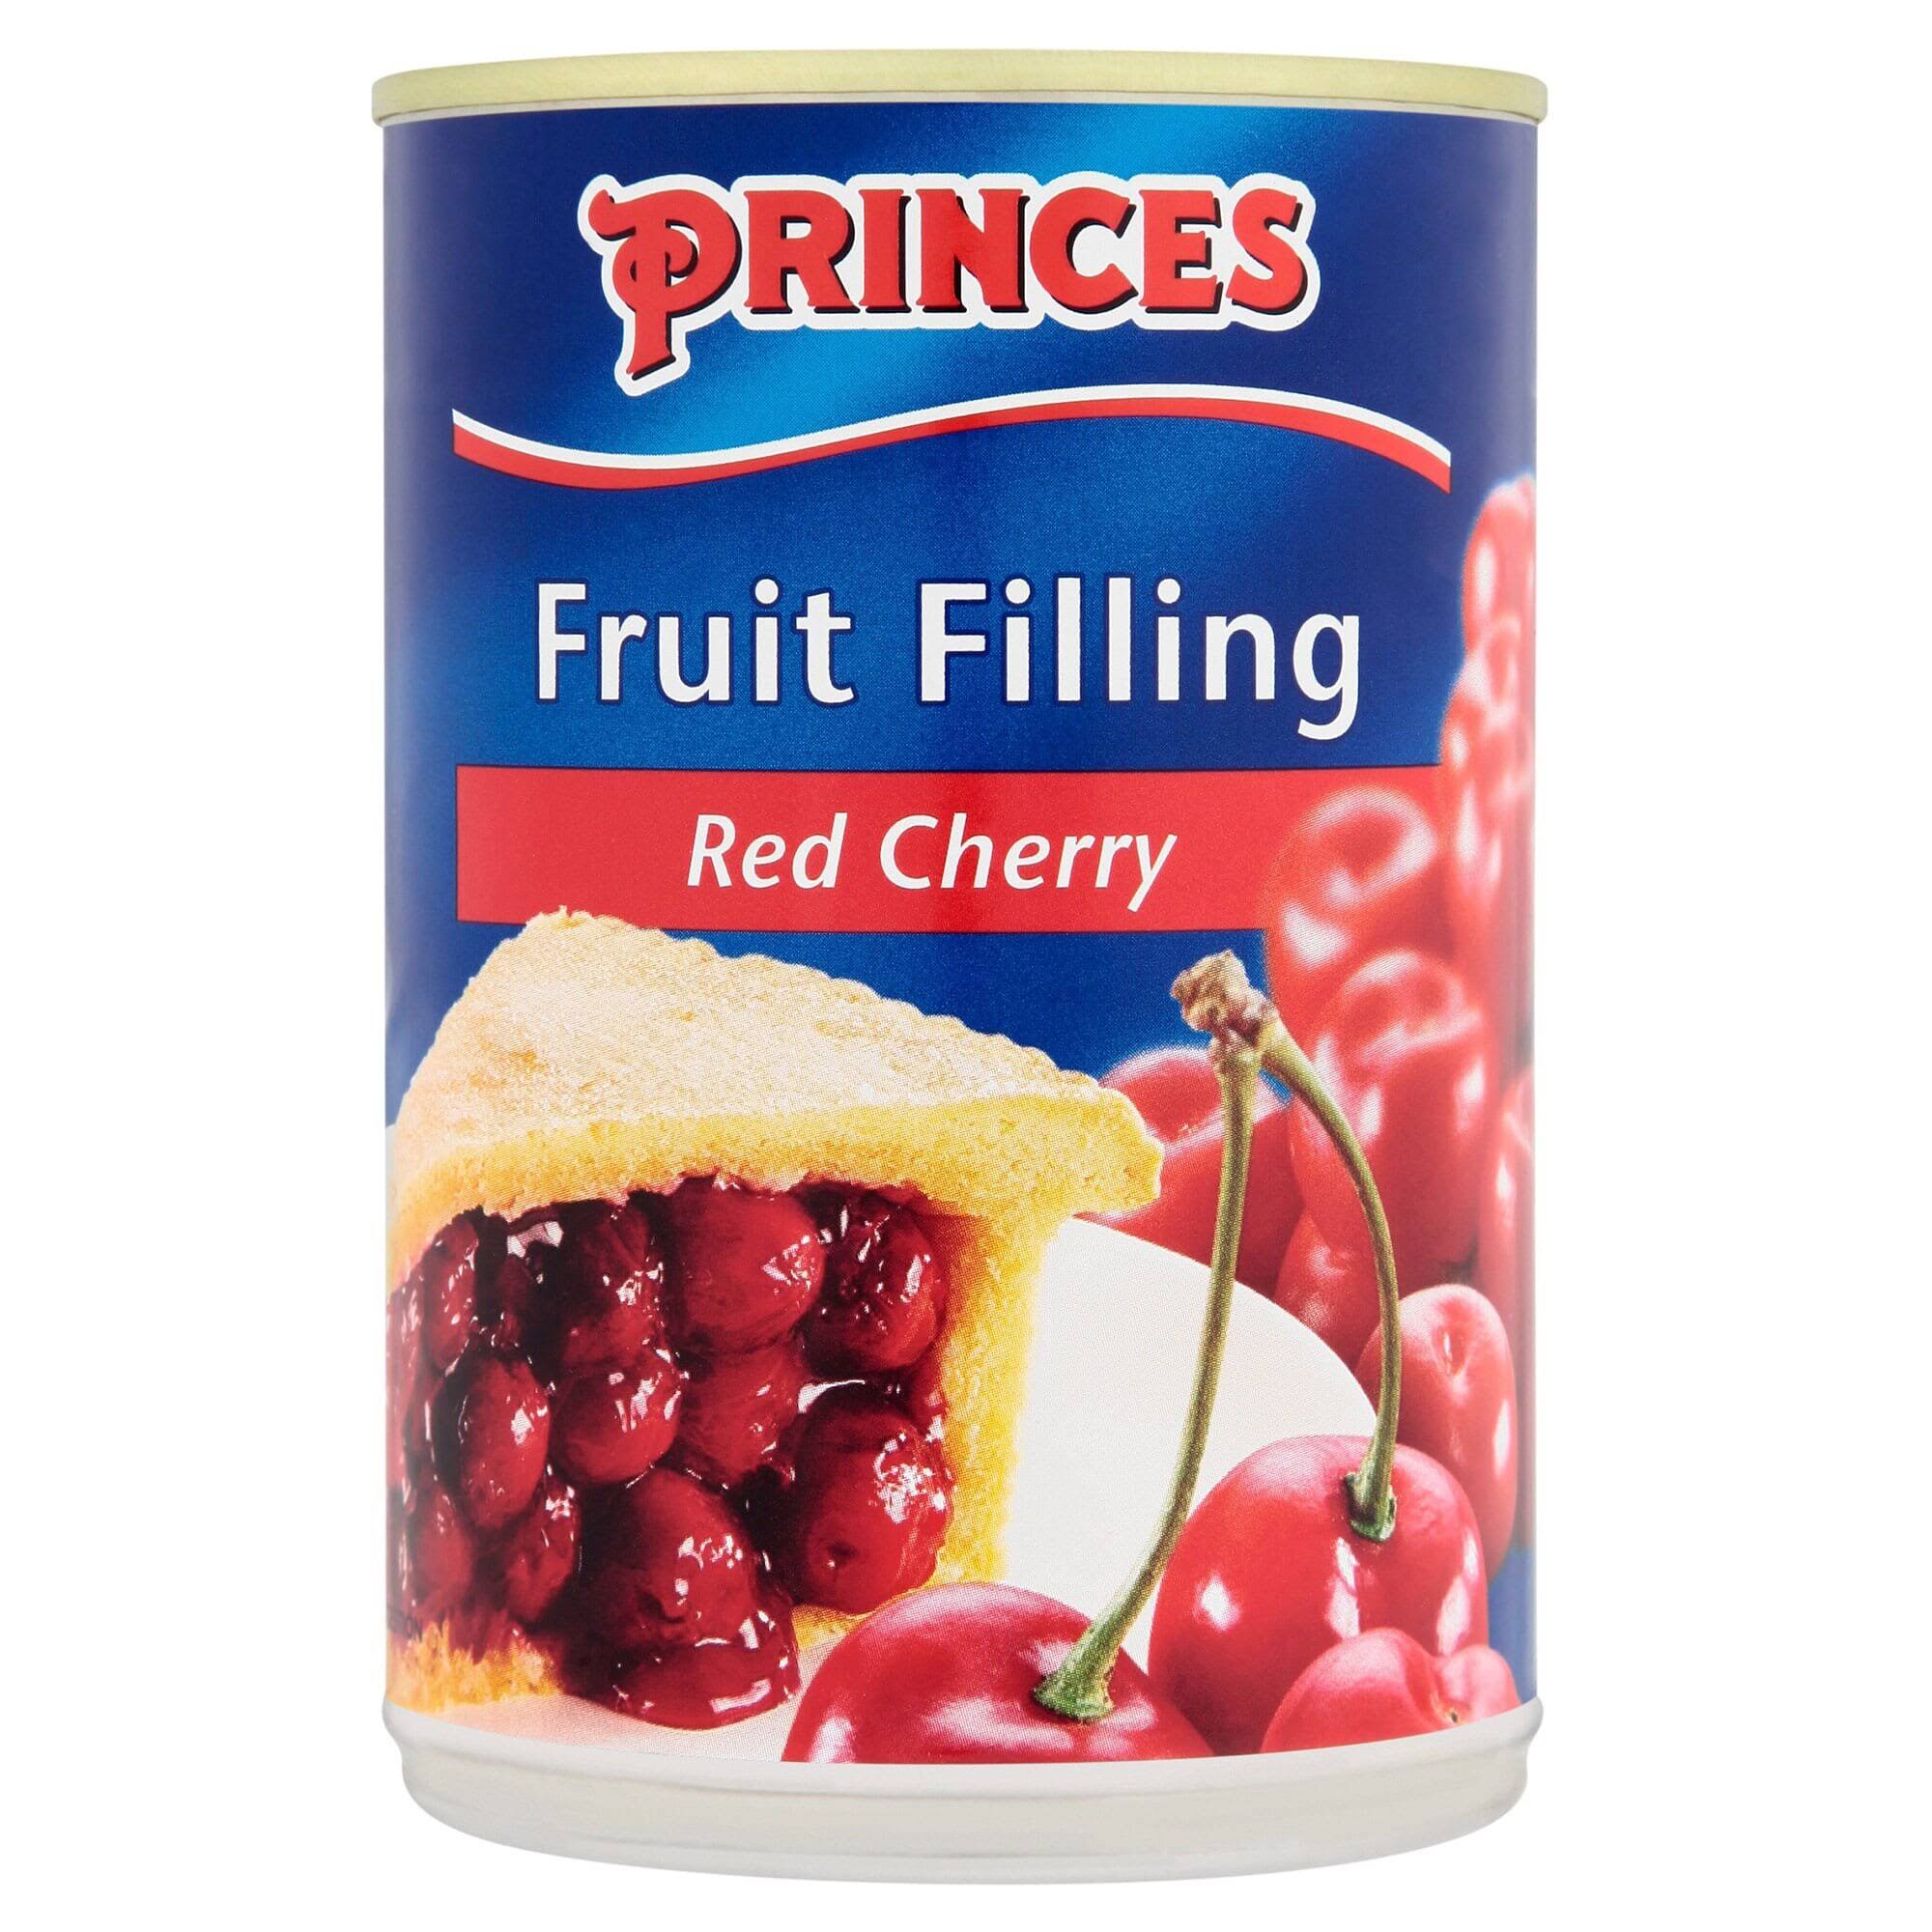 Princes Fruit Filling - Red Cherry, 410g